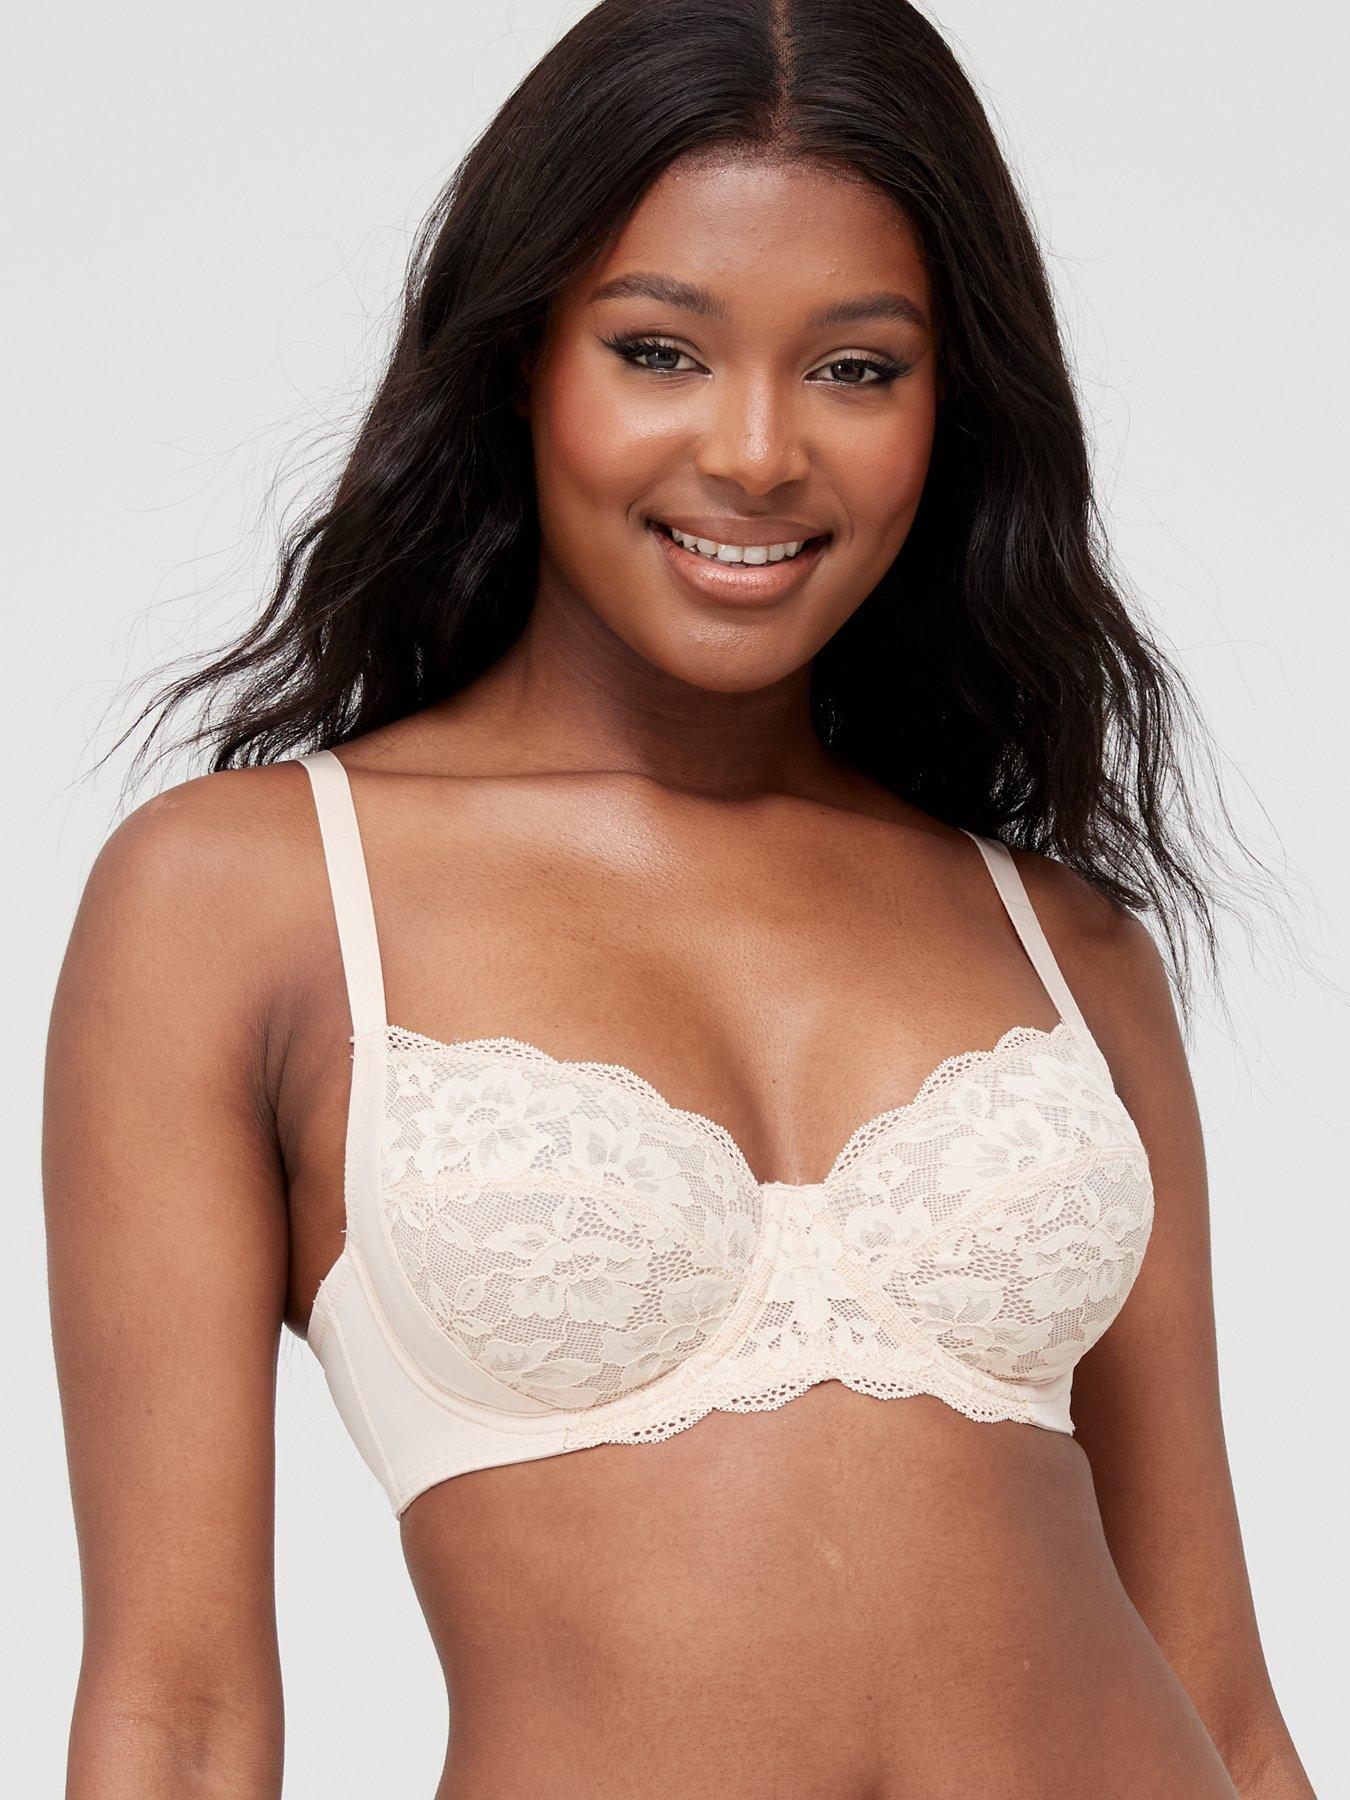 Hourglass Firm Control Wear Your Own Bra Slip - Nude